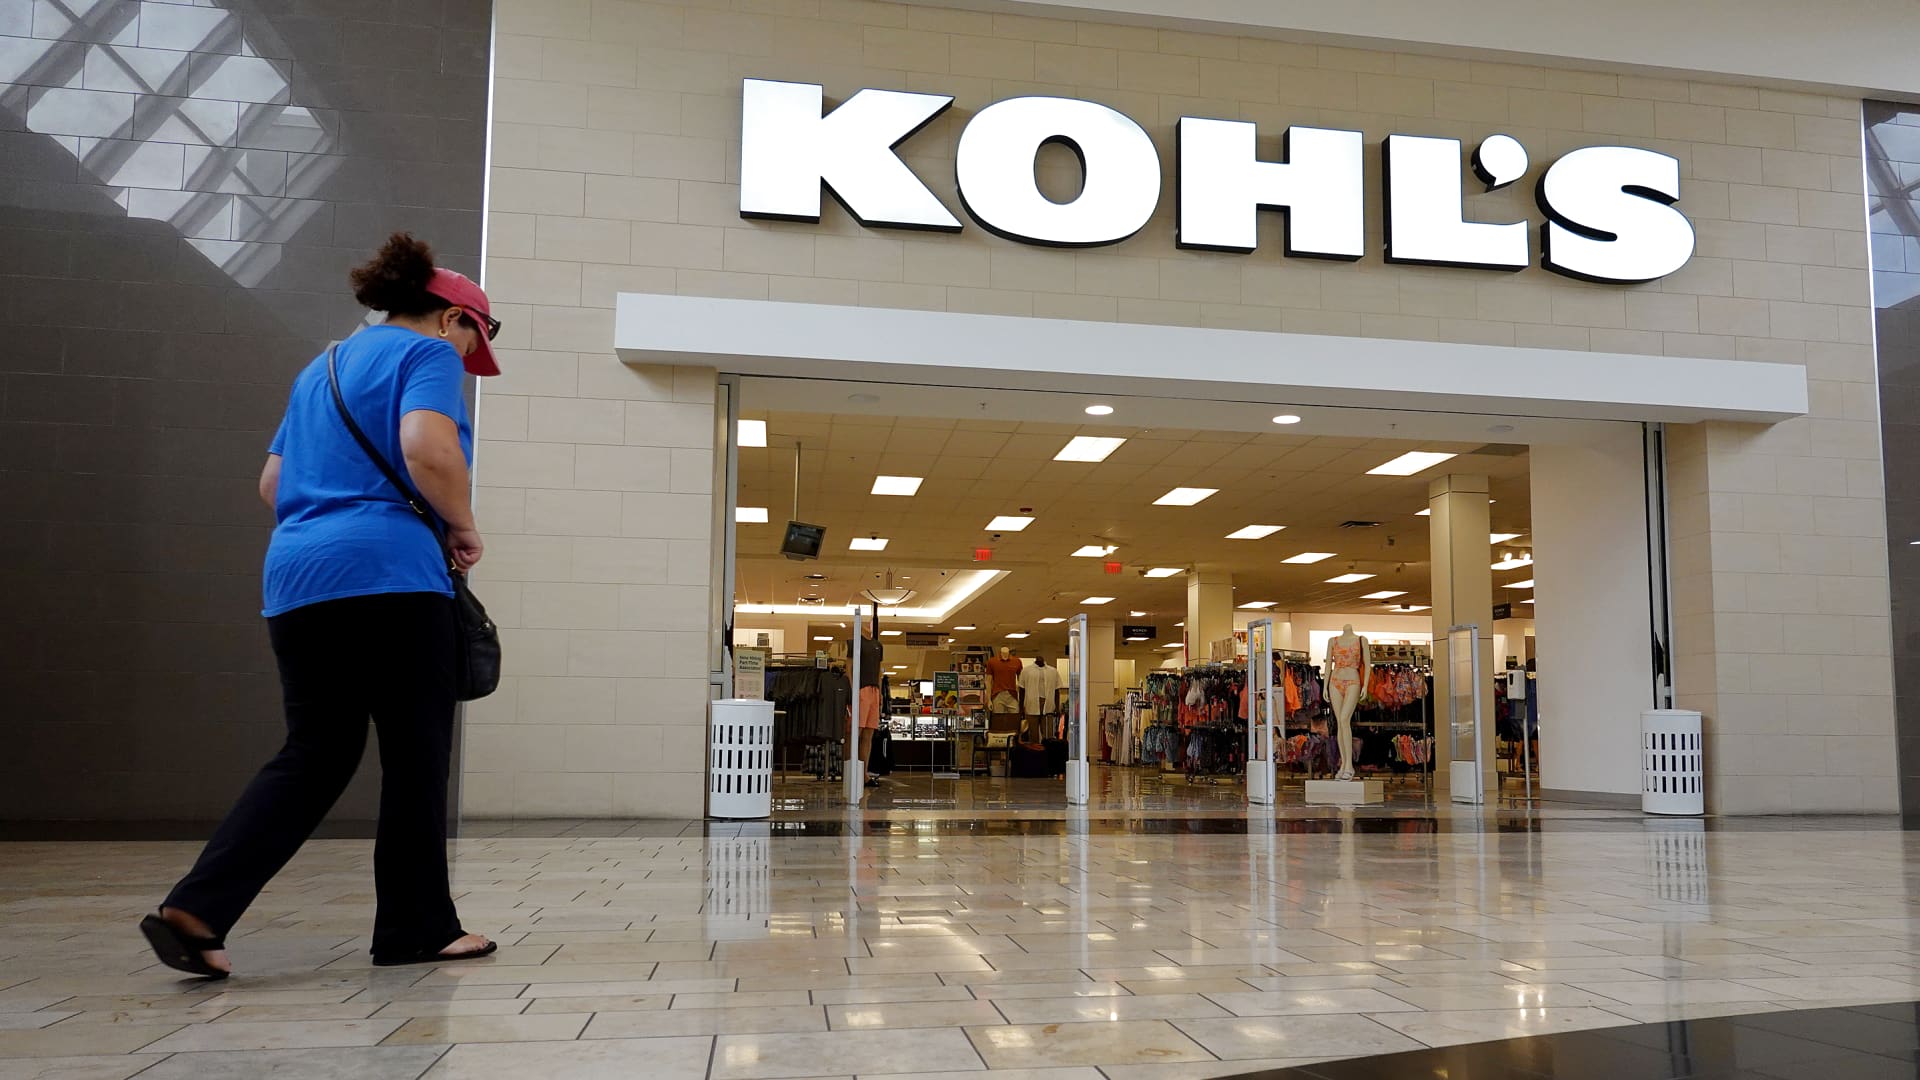 Kohl's shares stumble after bad earnings miss